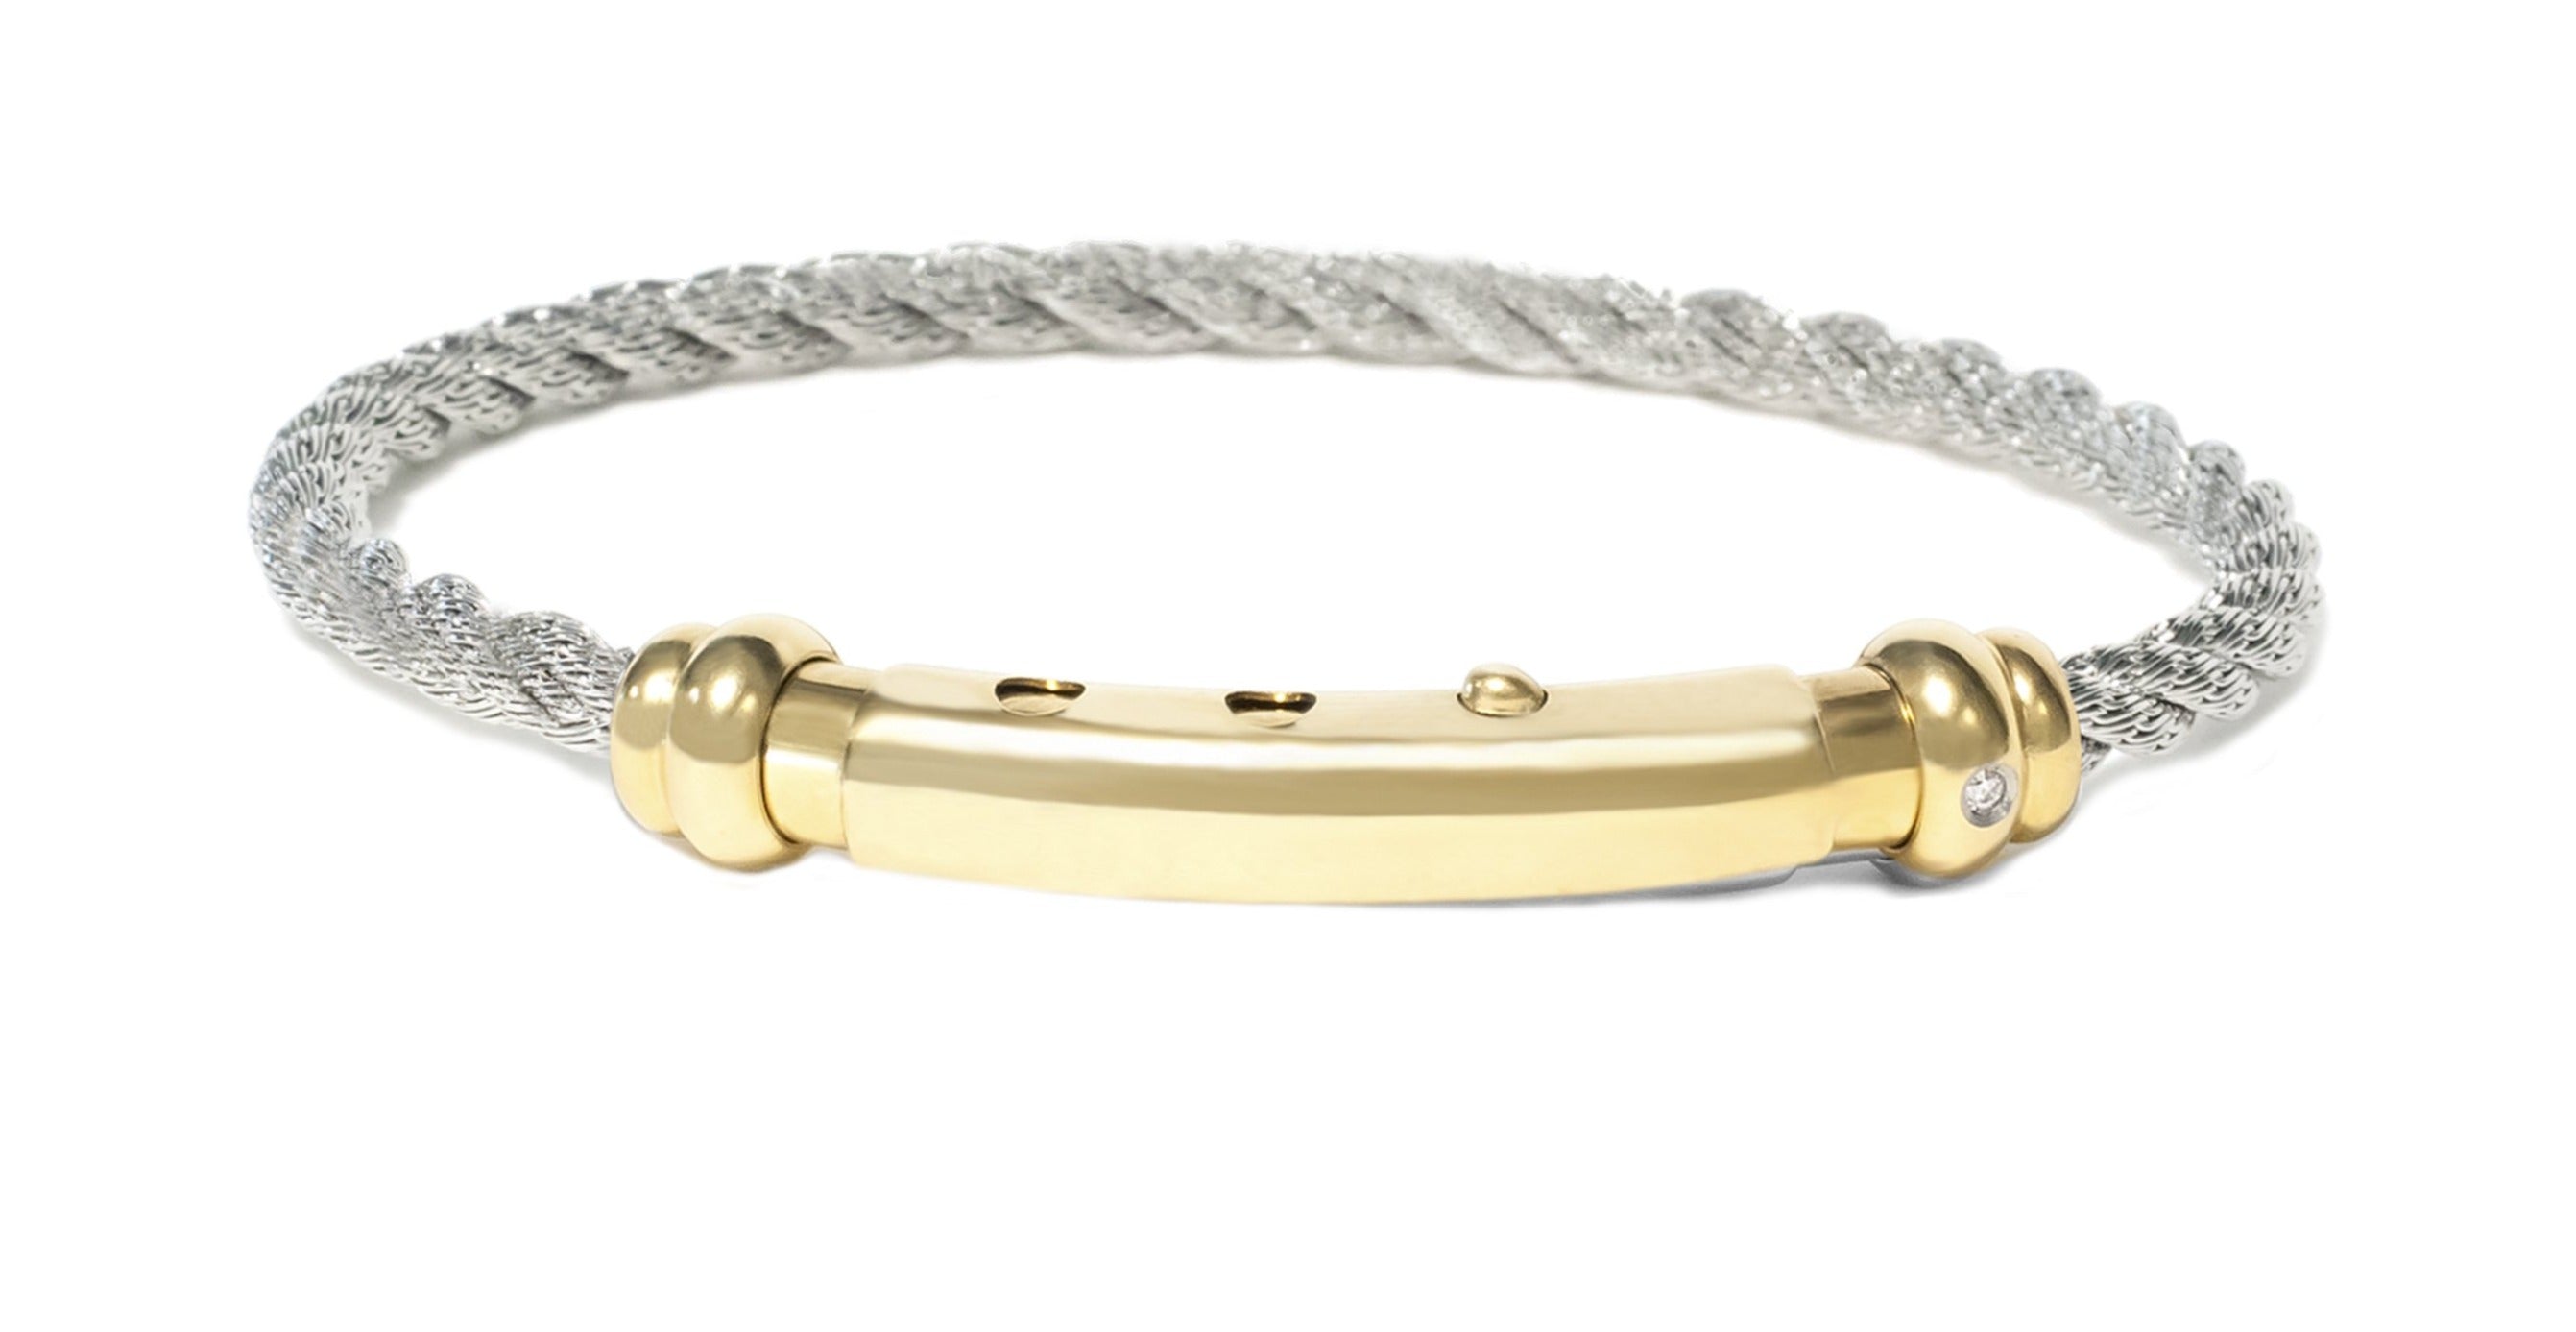 Crafted from PVD stainless steel, this 8" long Italian bangle features a rope-style design. Secured with an adjustable clasp, the bracelet is adorned with one diamond for an elegant look.